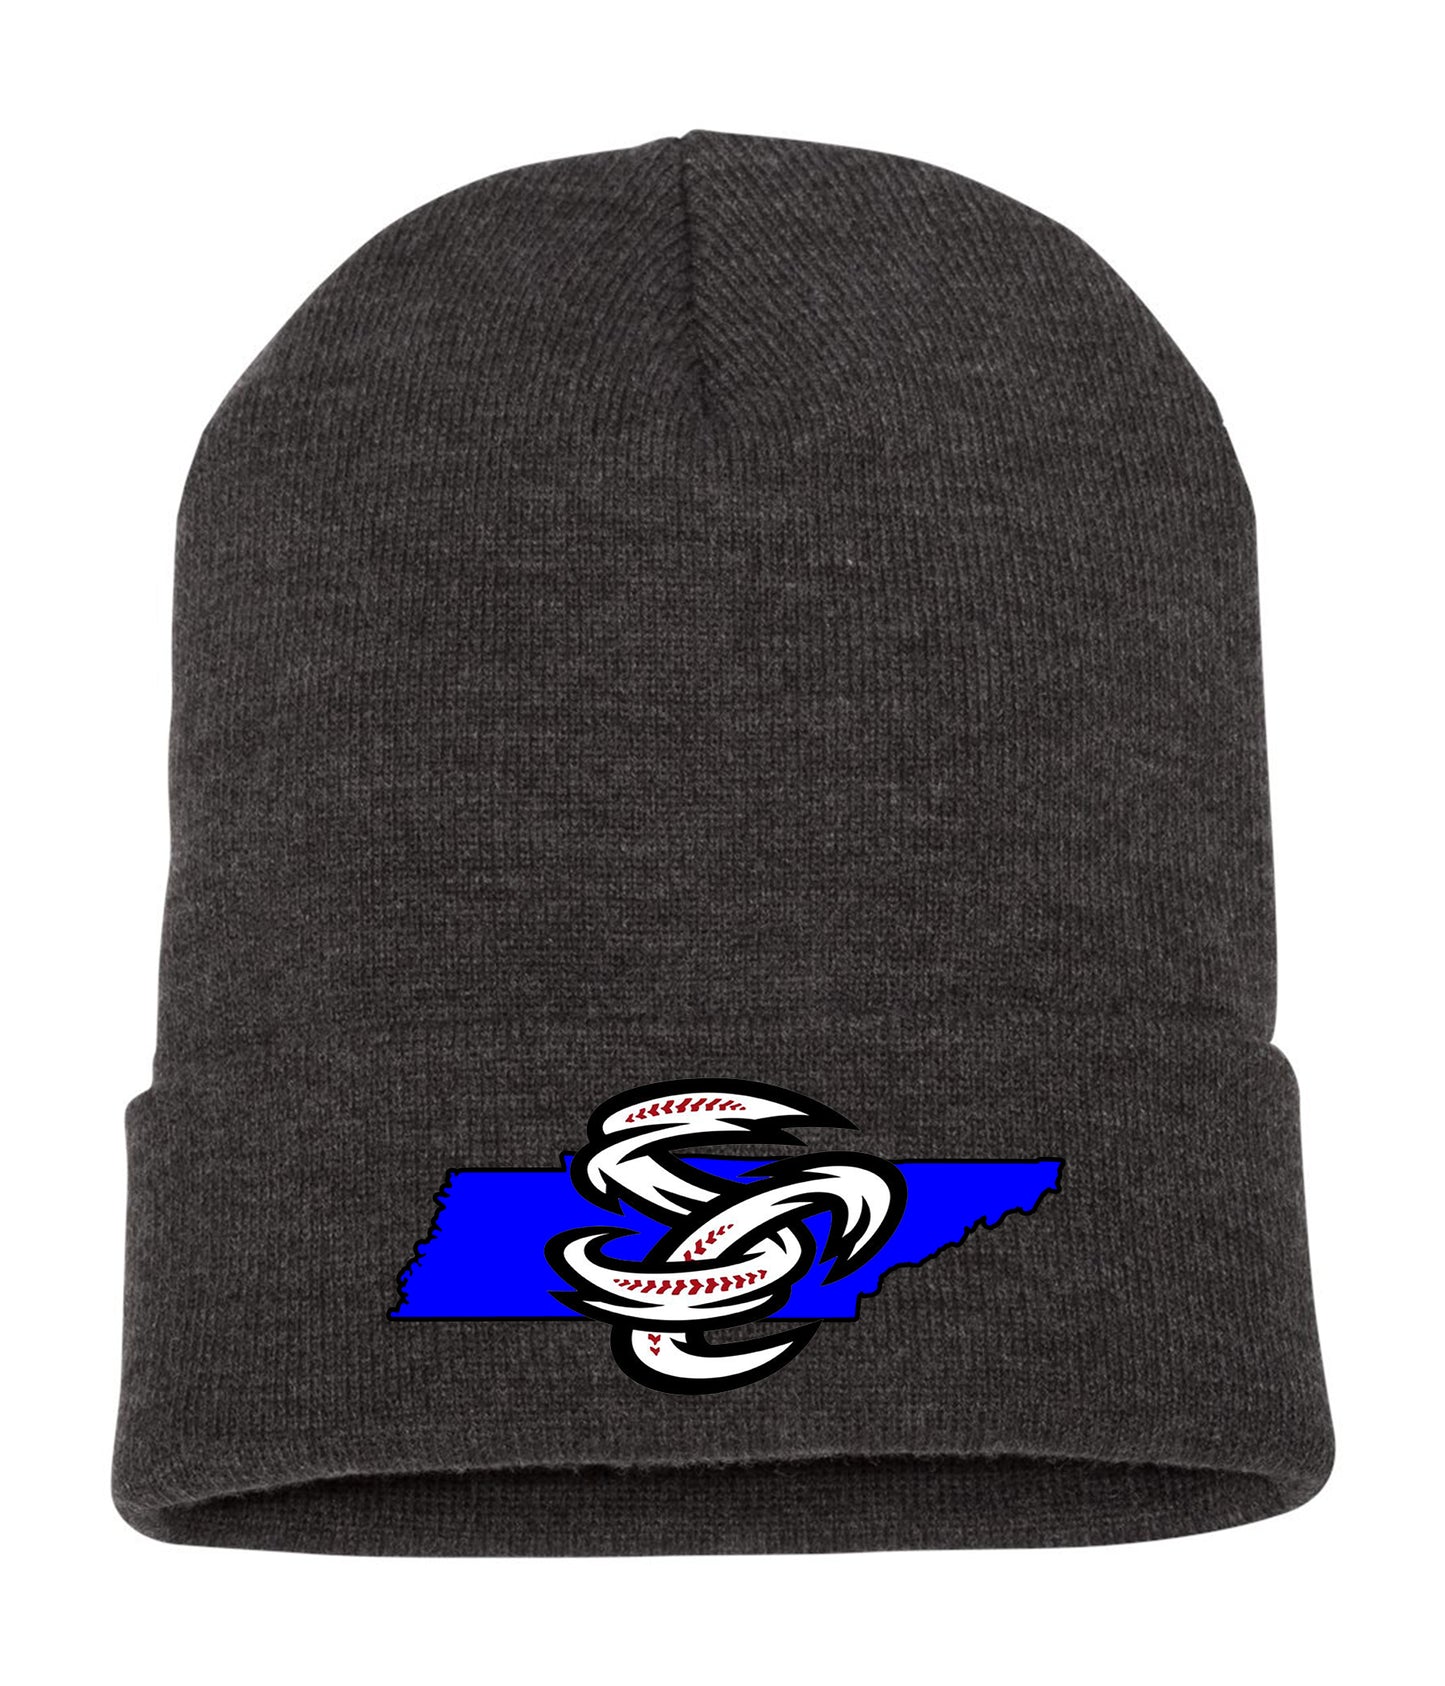 Stormchasers TN State Beanie